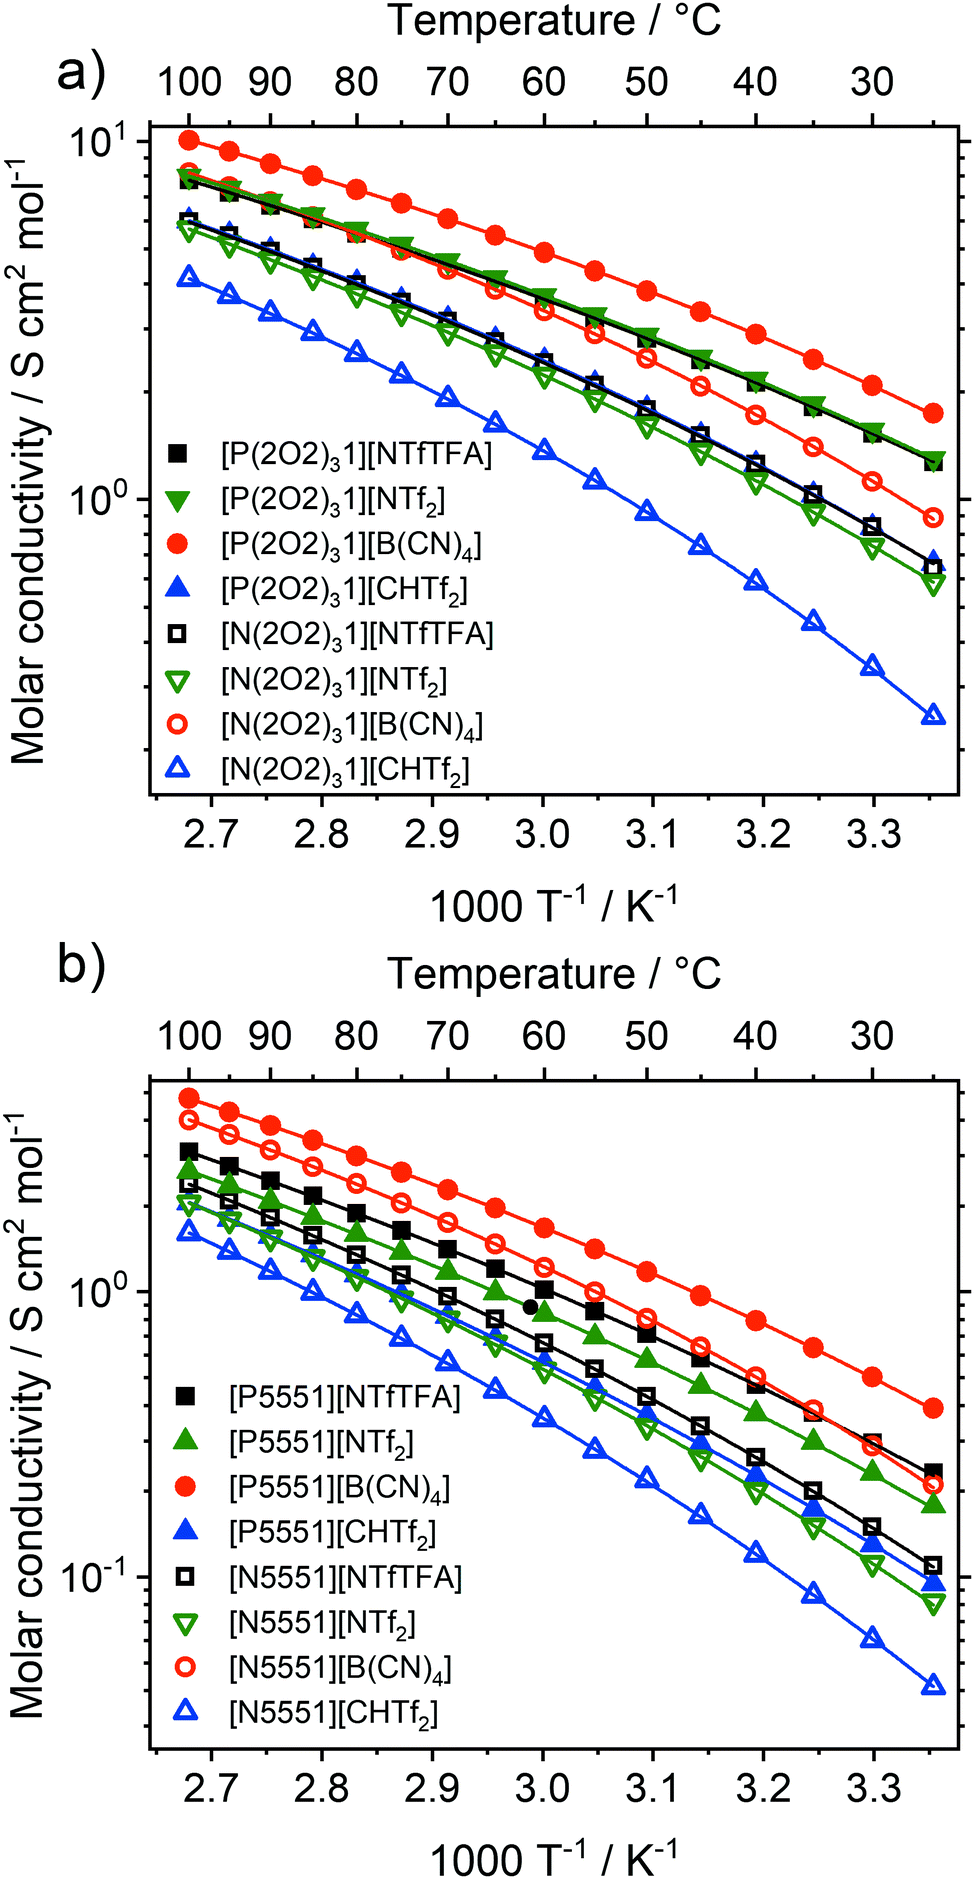 Ether Functionalisation Ion Conformation And The Optimisation Of Macroscopic Properties In Ionic Liquids Physical Chemistry Chemical Physics Rsc Publishing Doi 10 1039 D0cpf